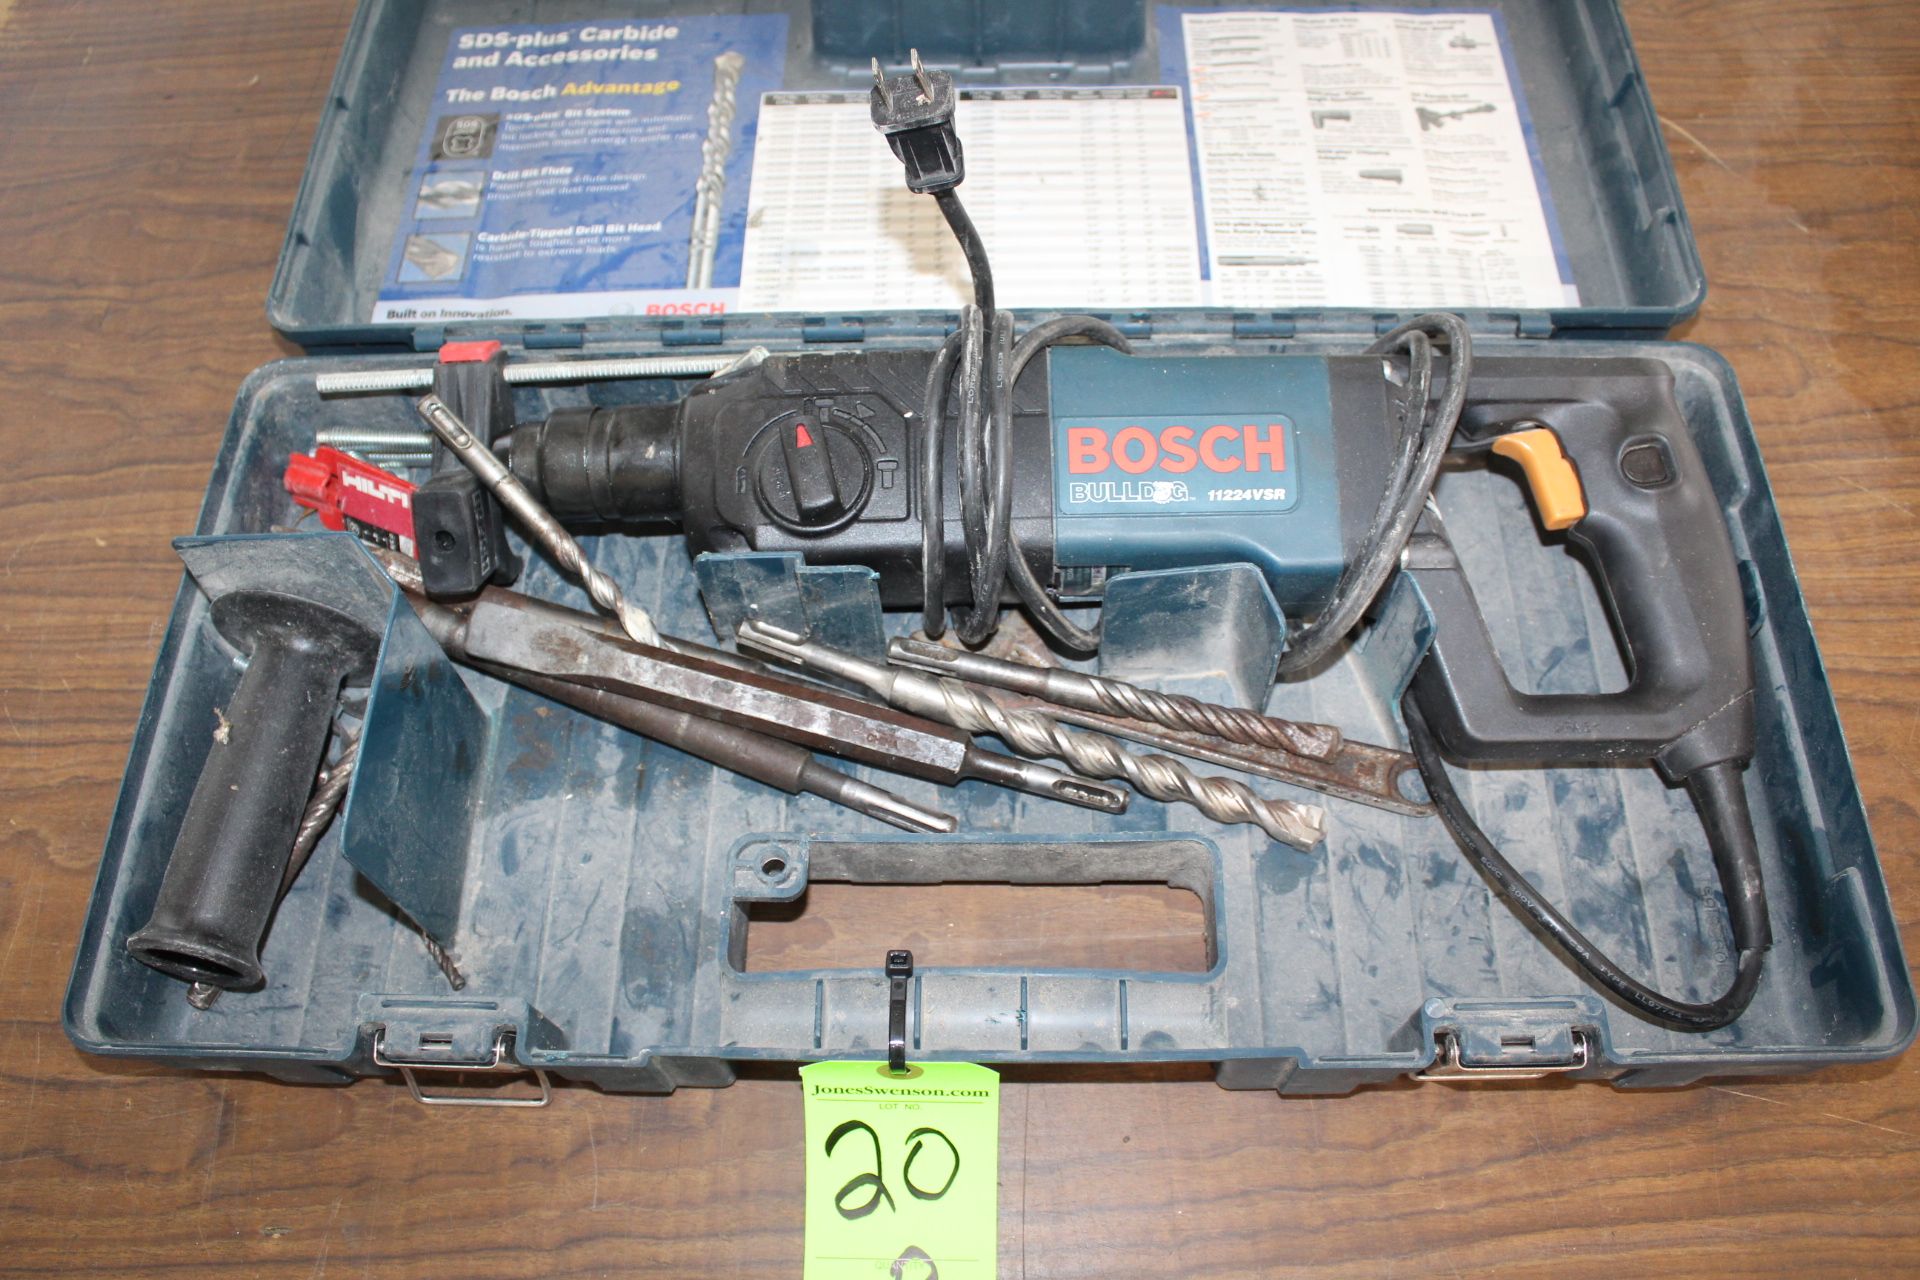 Bosch Bulldog 11224VSR Corded Rotary Hammer Drill, in Hard Case with Accessories